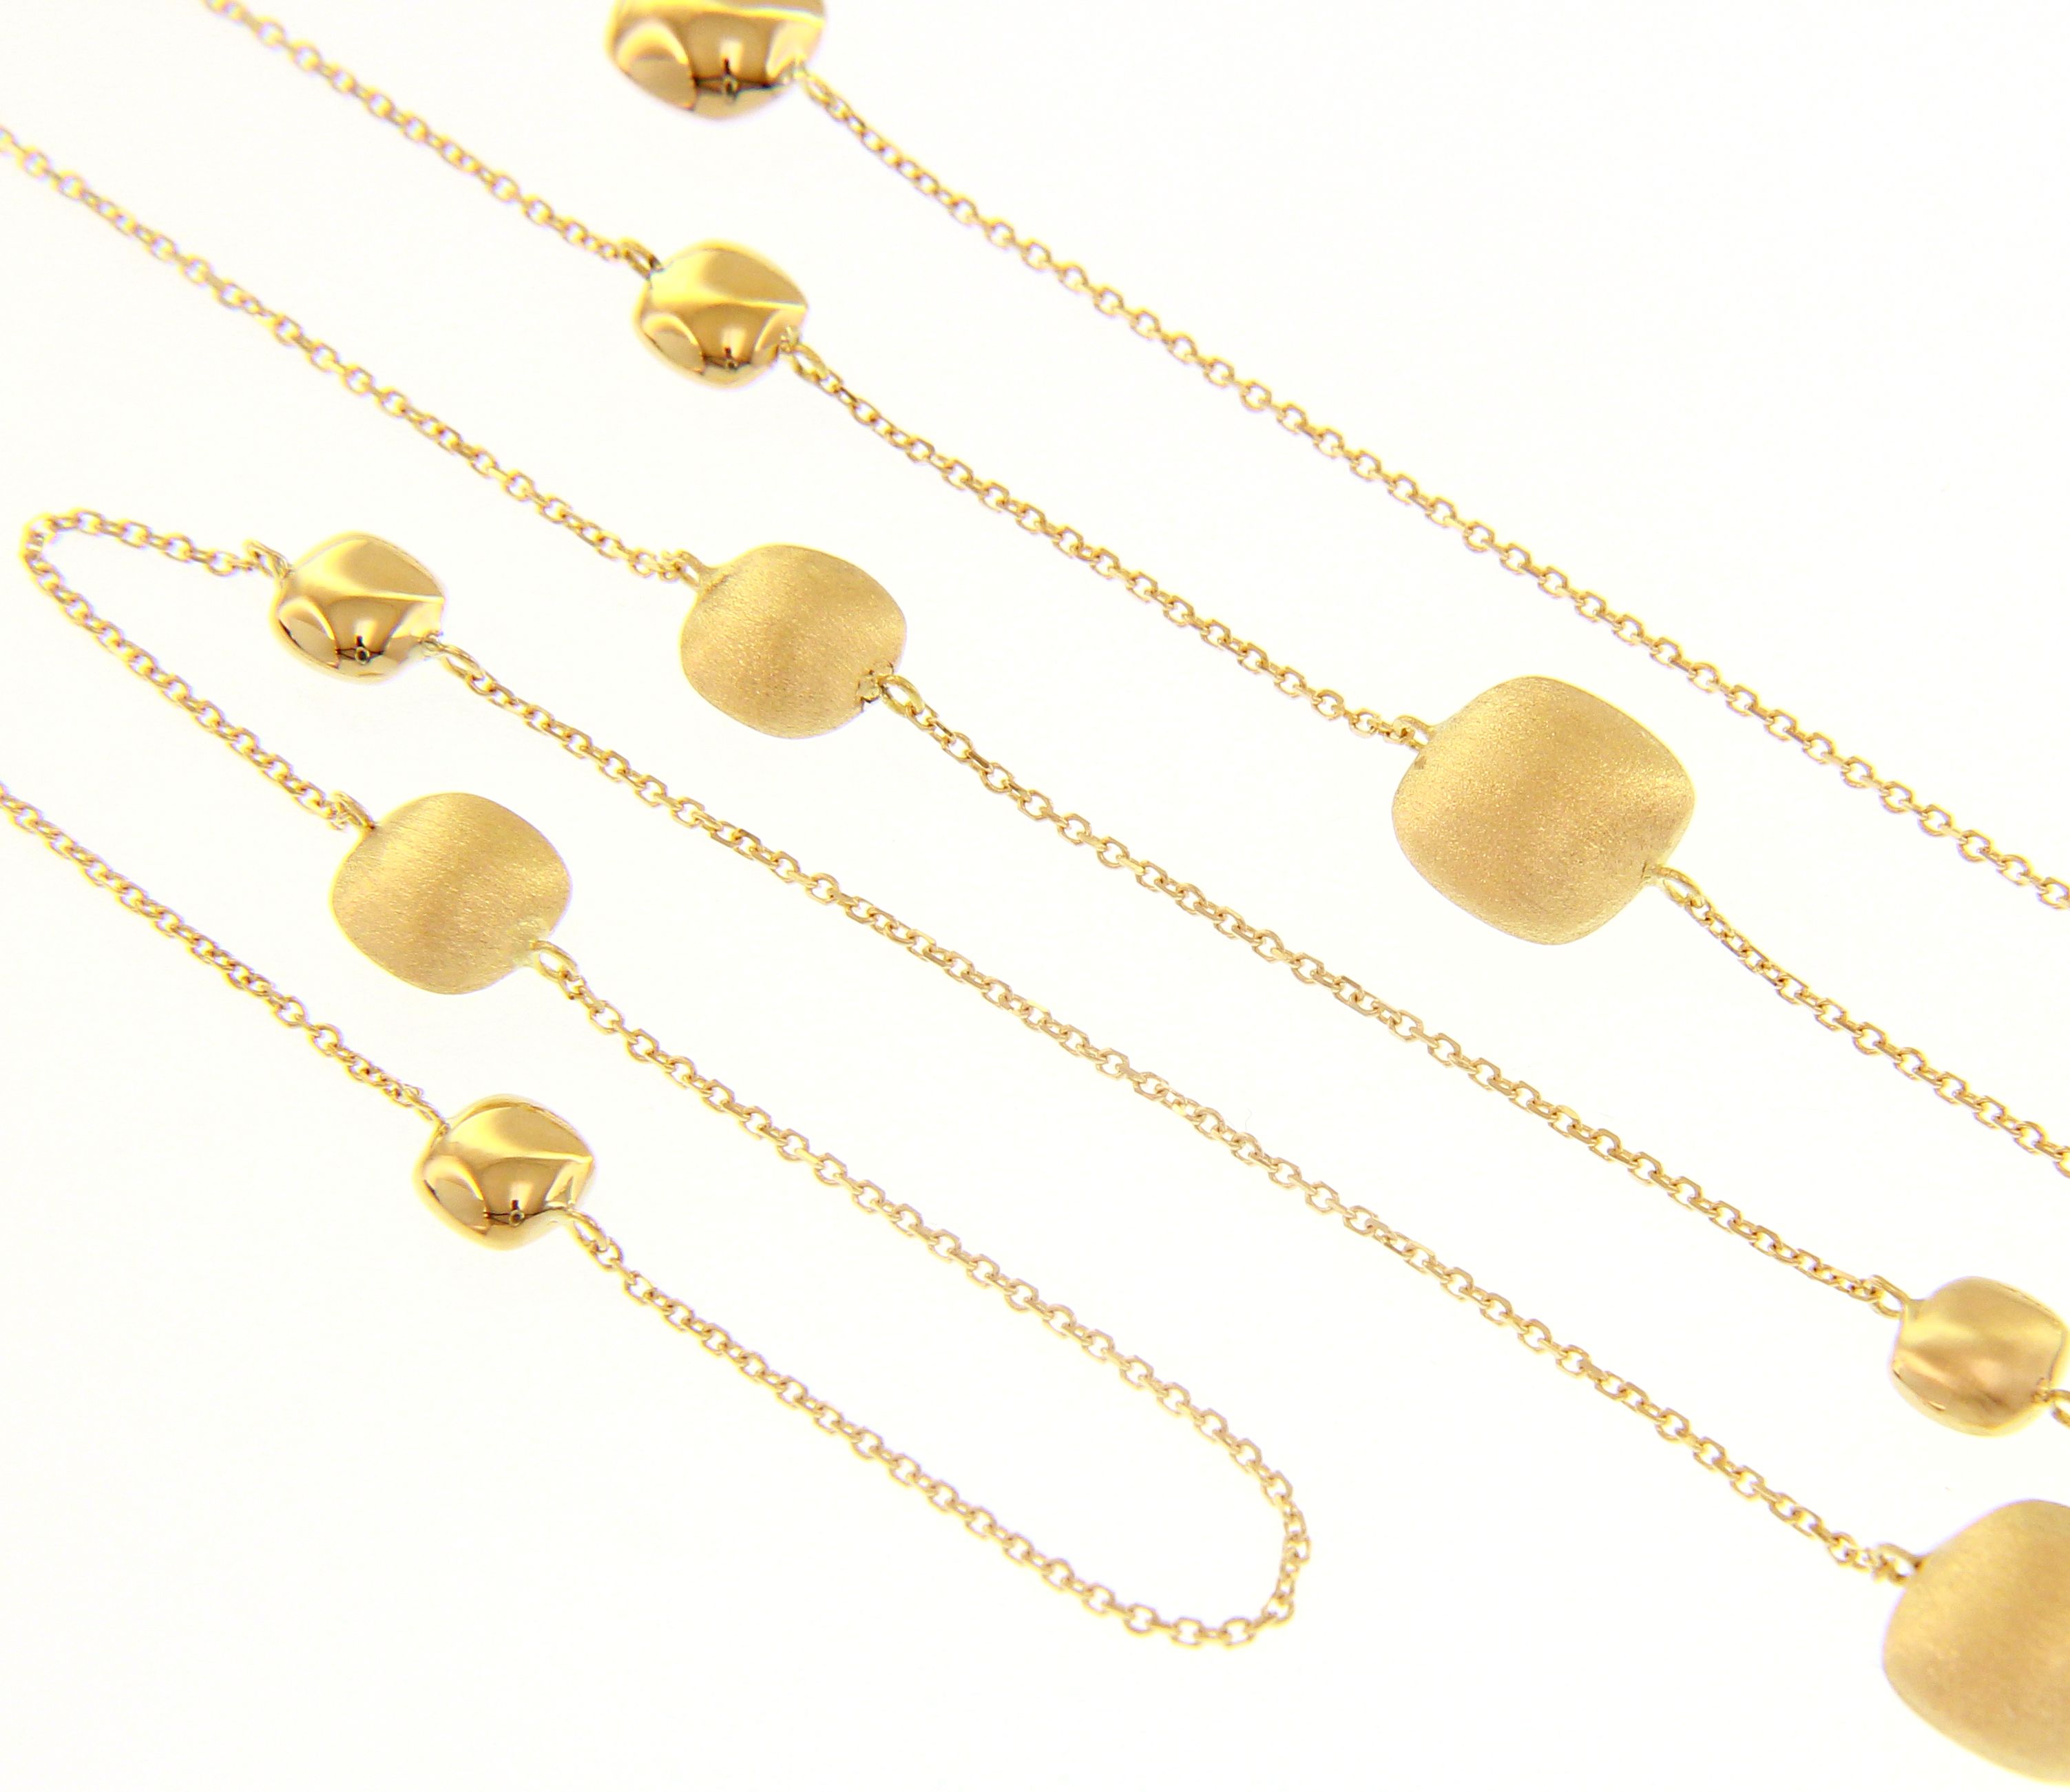 Beautiful 18ct Yellow Gold 90cm Chain Necklace